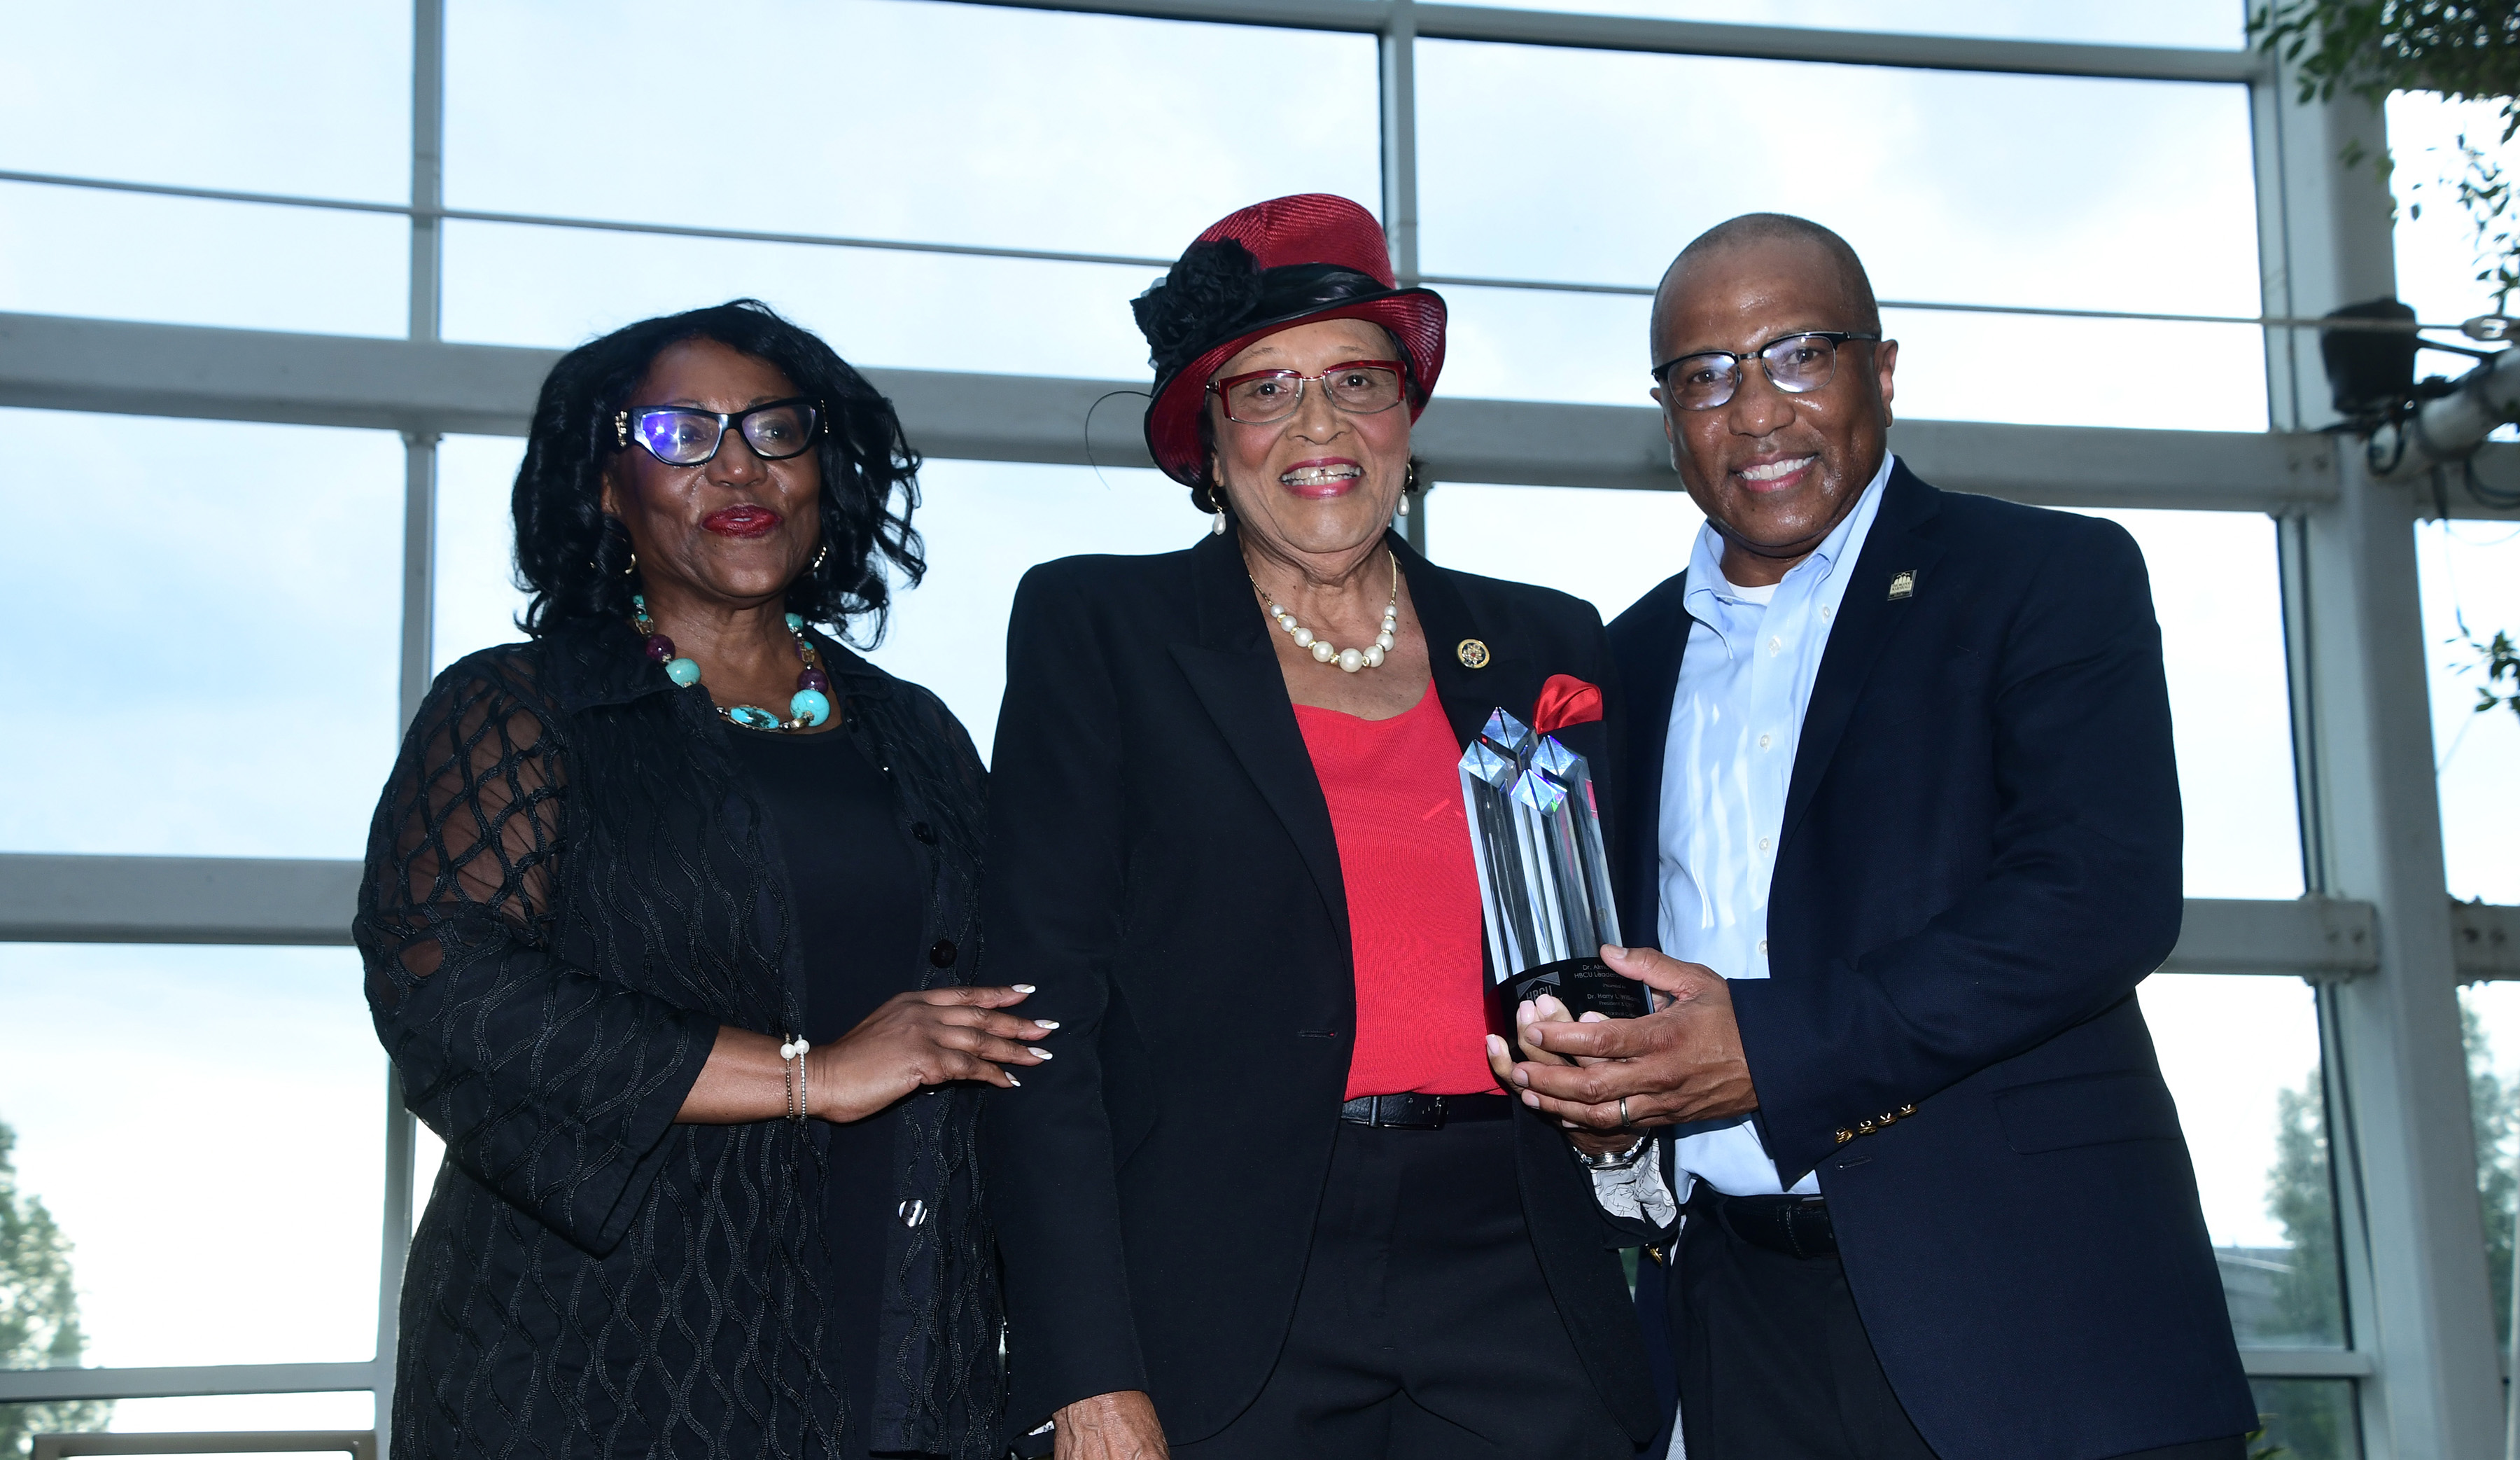 Dr. Harry L. Williams (r), CEO and President of the Thurgood Marshall College Fund, receives the inaugural Dr. Alma Adams Leadership Award from Dr. Vita Pickrum (l) and Congresswoman Alma S. Adams during the first day of the HBCU Philanthropy Symposium in National Harbor, Md. 